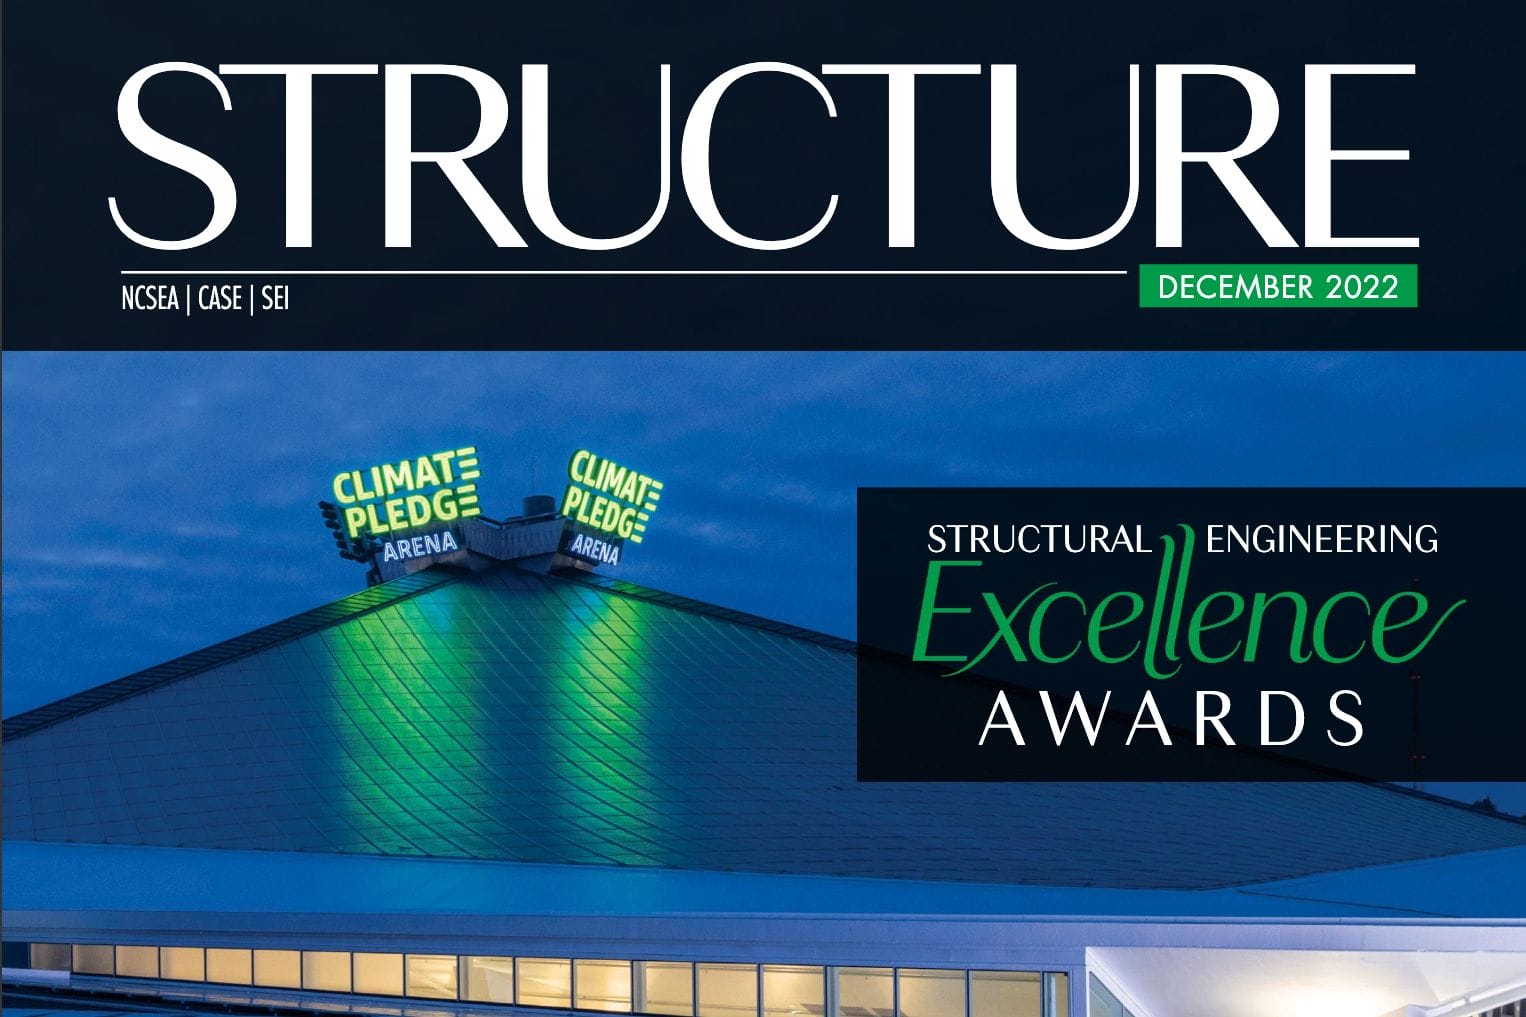 The cover of STRUCTURE magazine